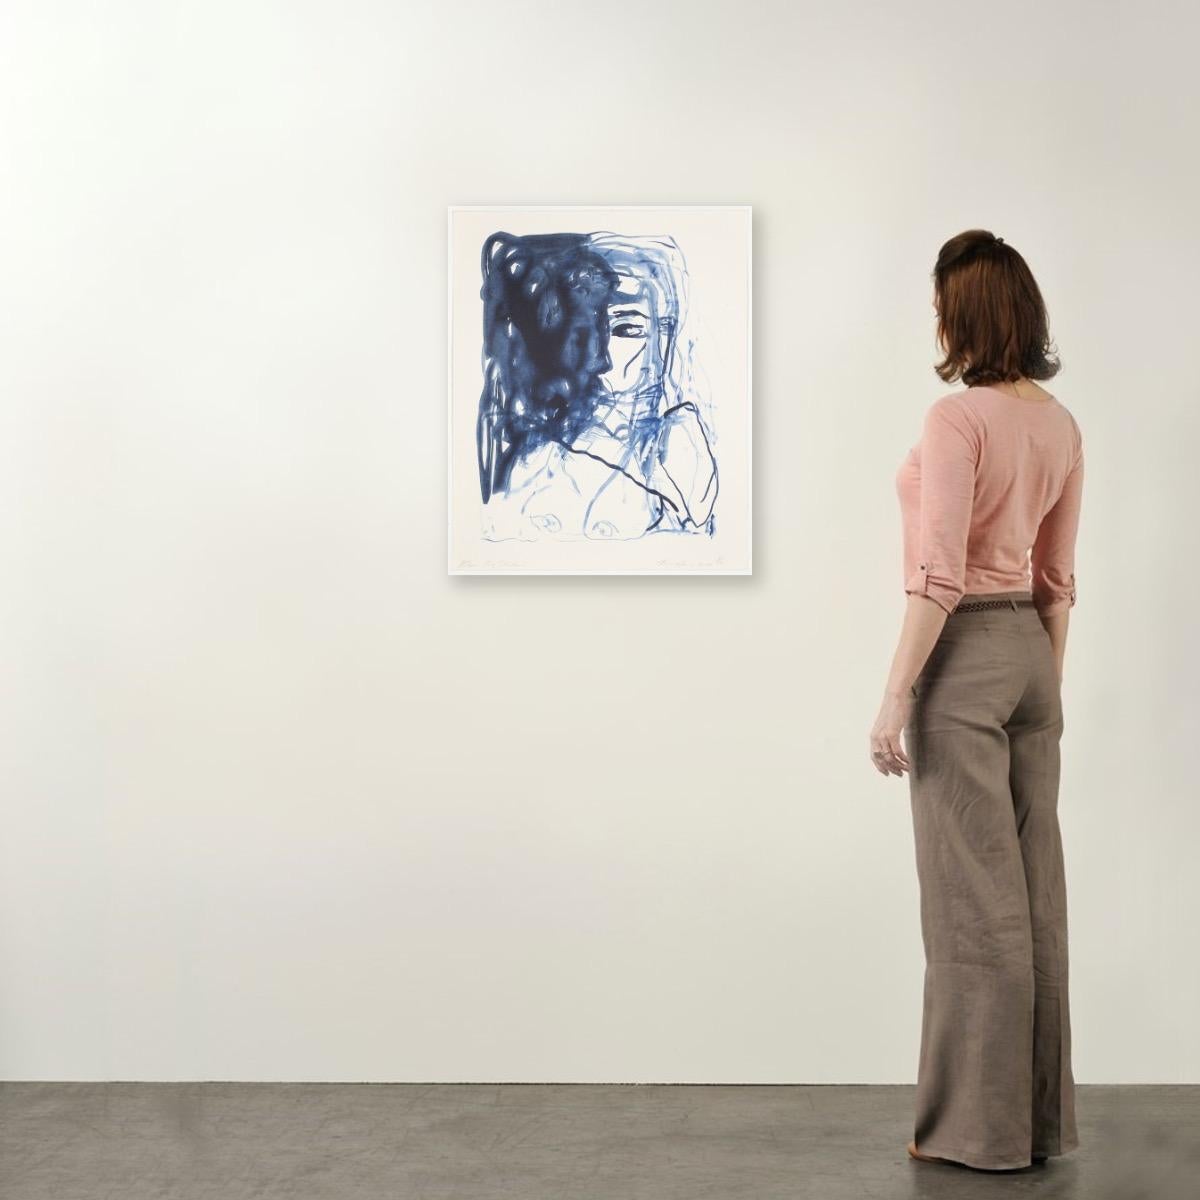 After The Shadow - Emin, Contemporary, YBAs, Lithograph, Blue, Portrait For Sale 1